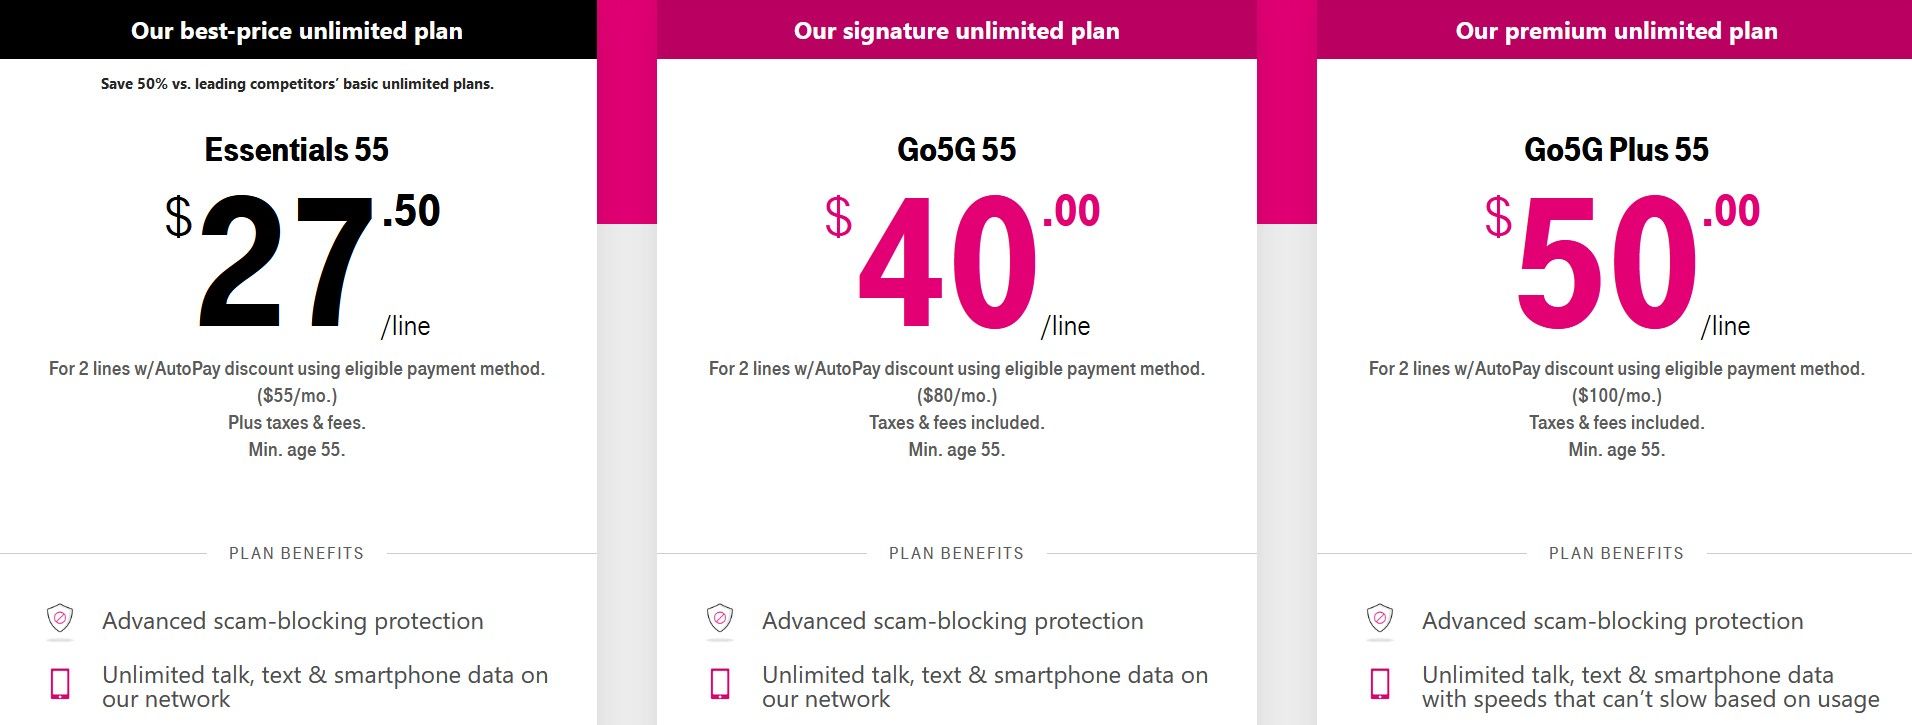 t-mobile prices.jpg